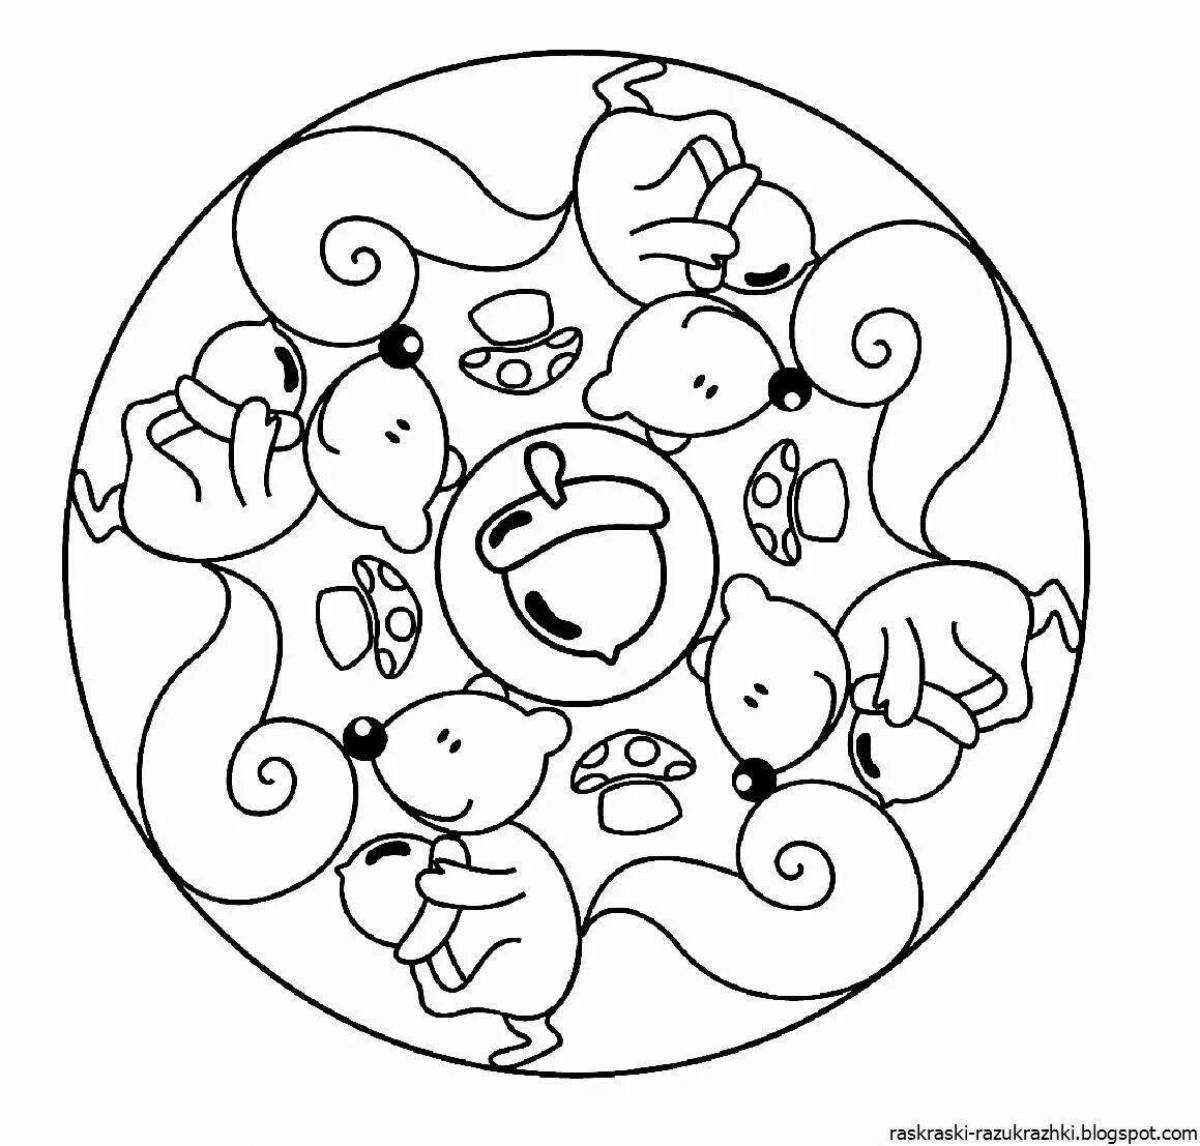 Crazy mandala coloring pages for 5-6 year olds